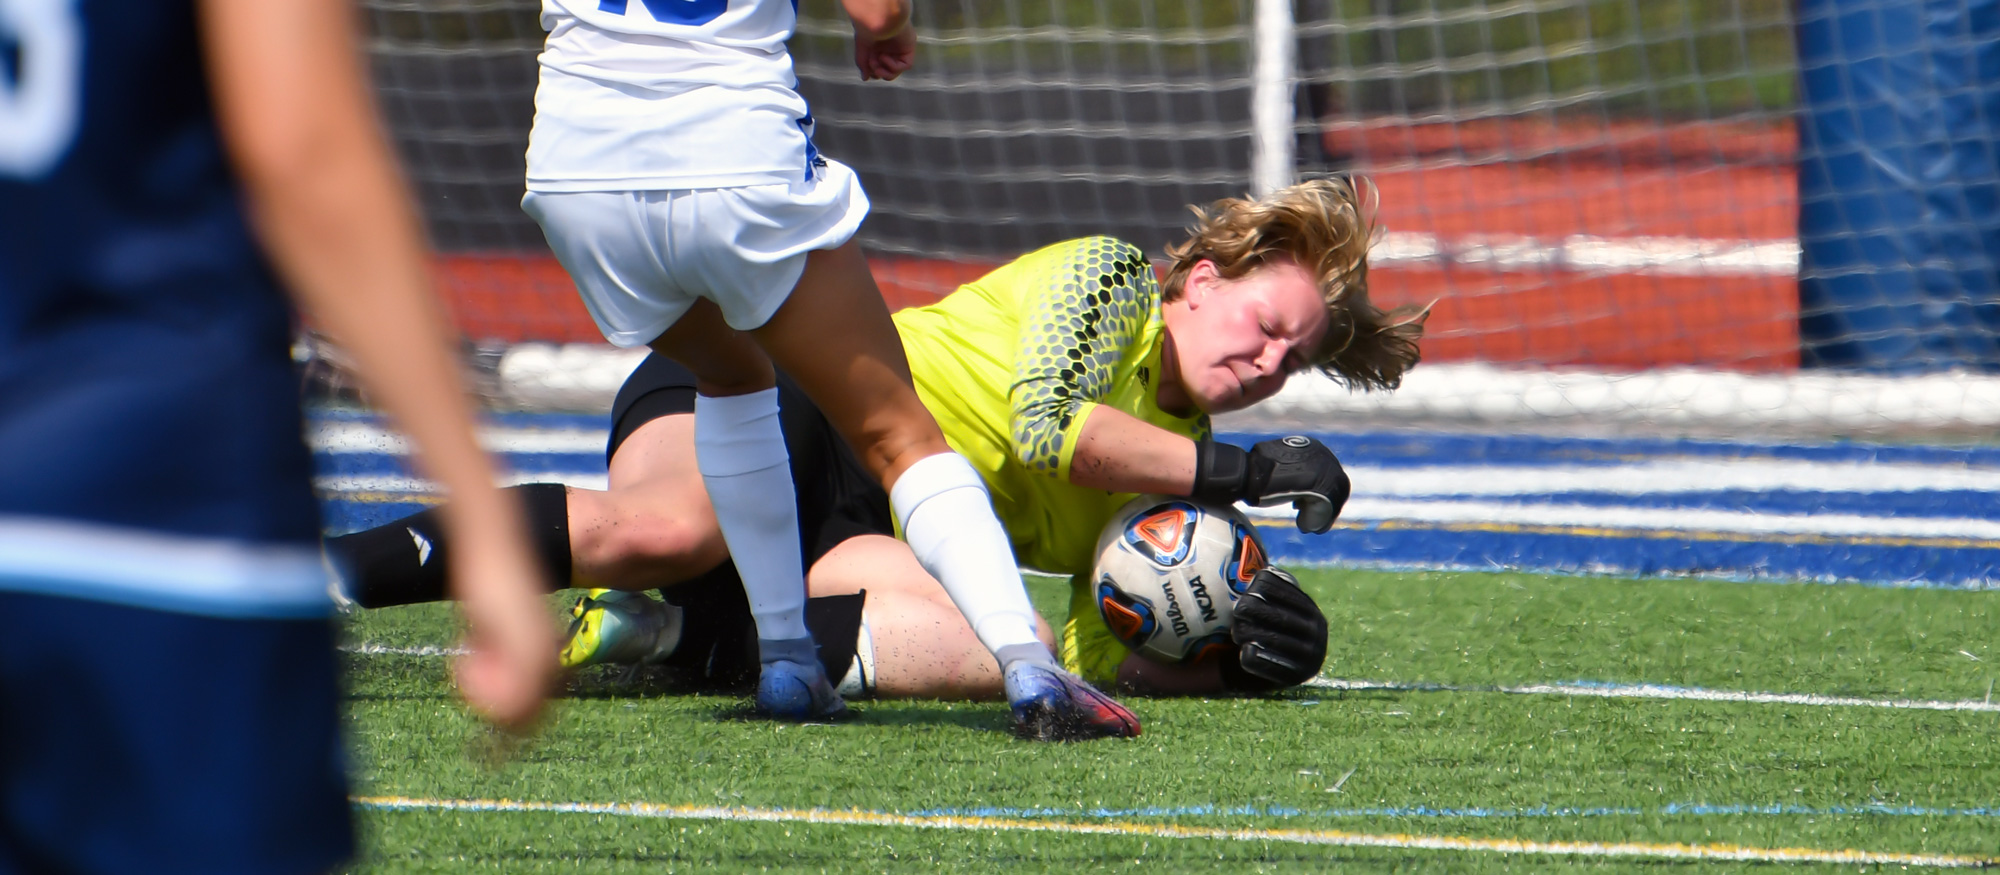 Shannon Breen made six saves in the second half of Mount Holyoke's 4-0 loss at No. 19 Babson on Oct. 15, 2022. (RJB Sports file photo)